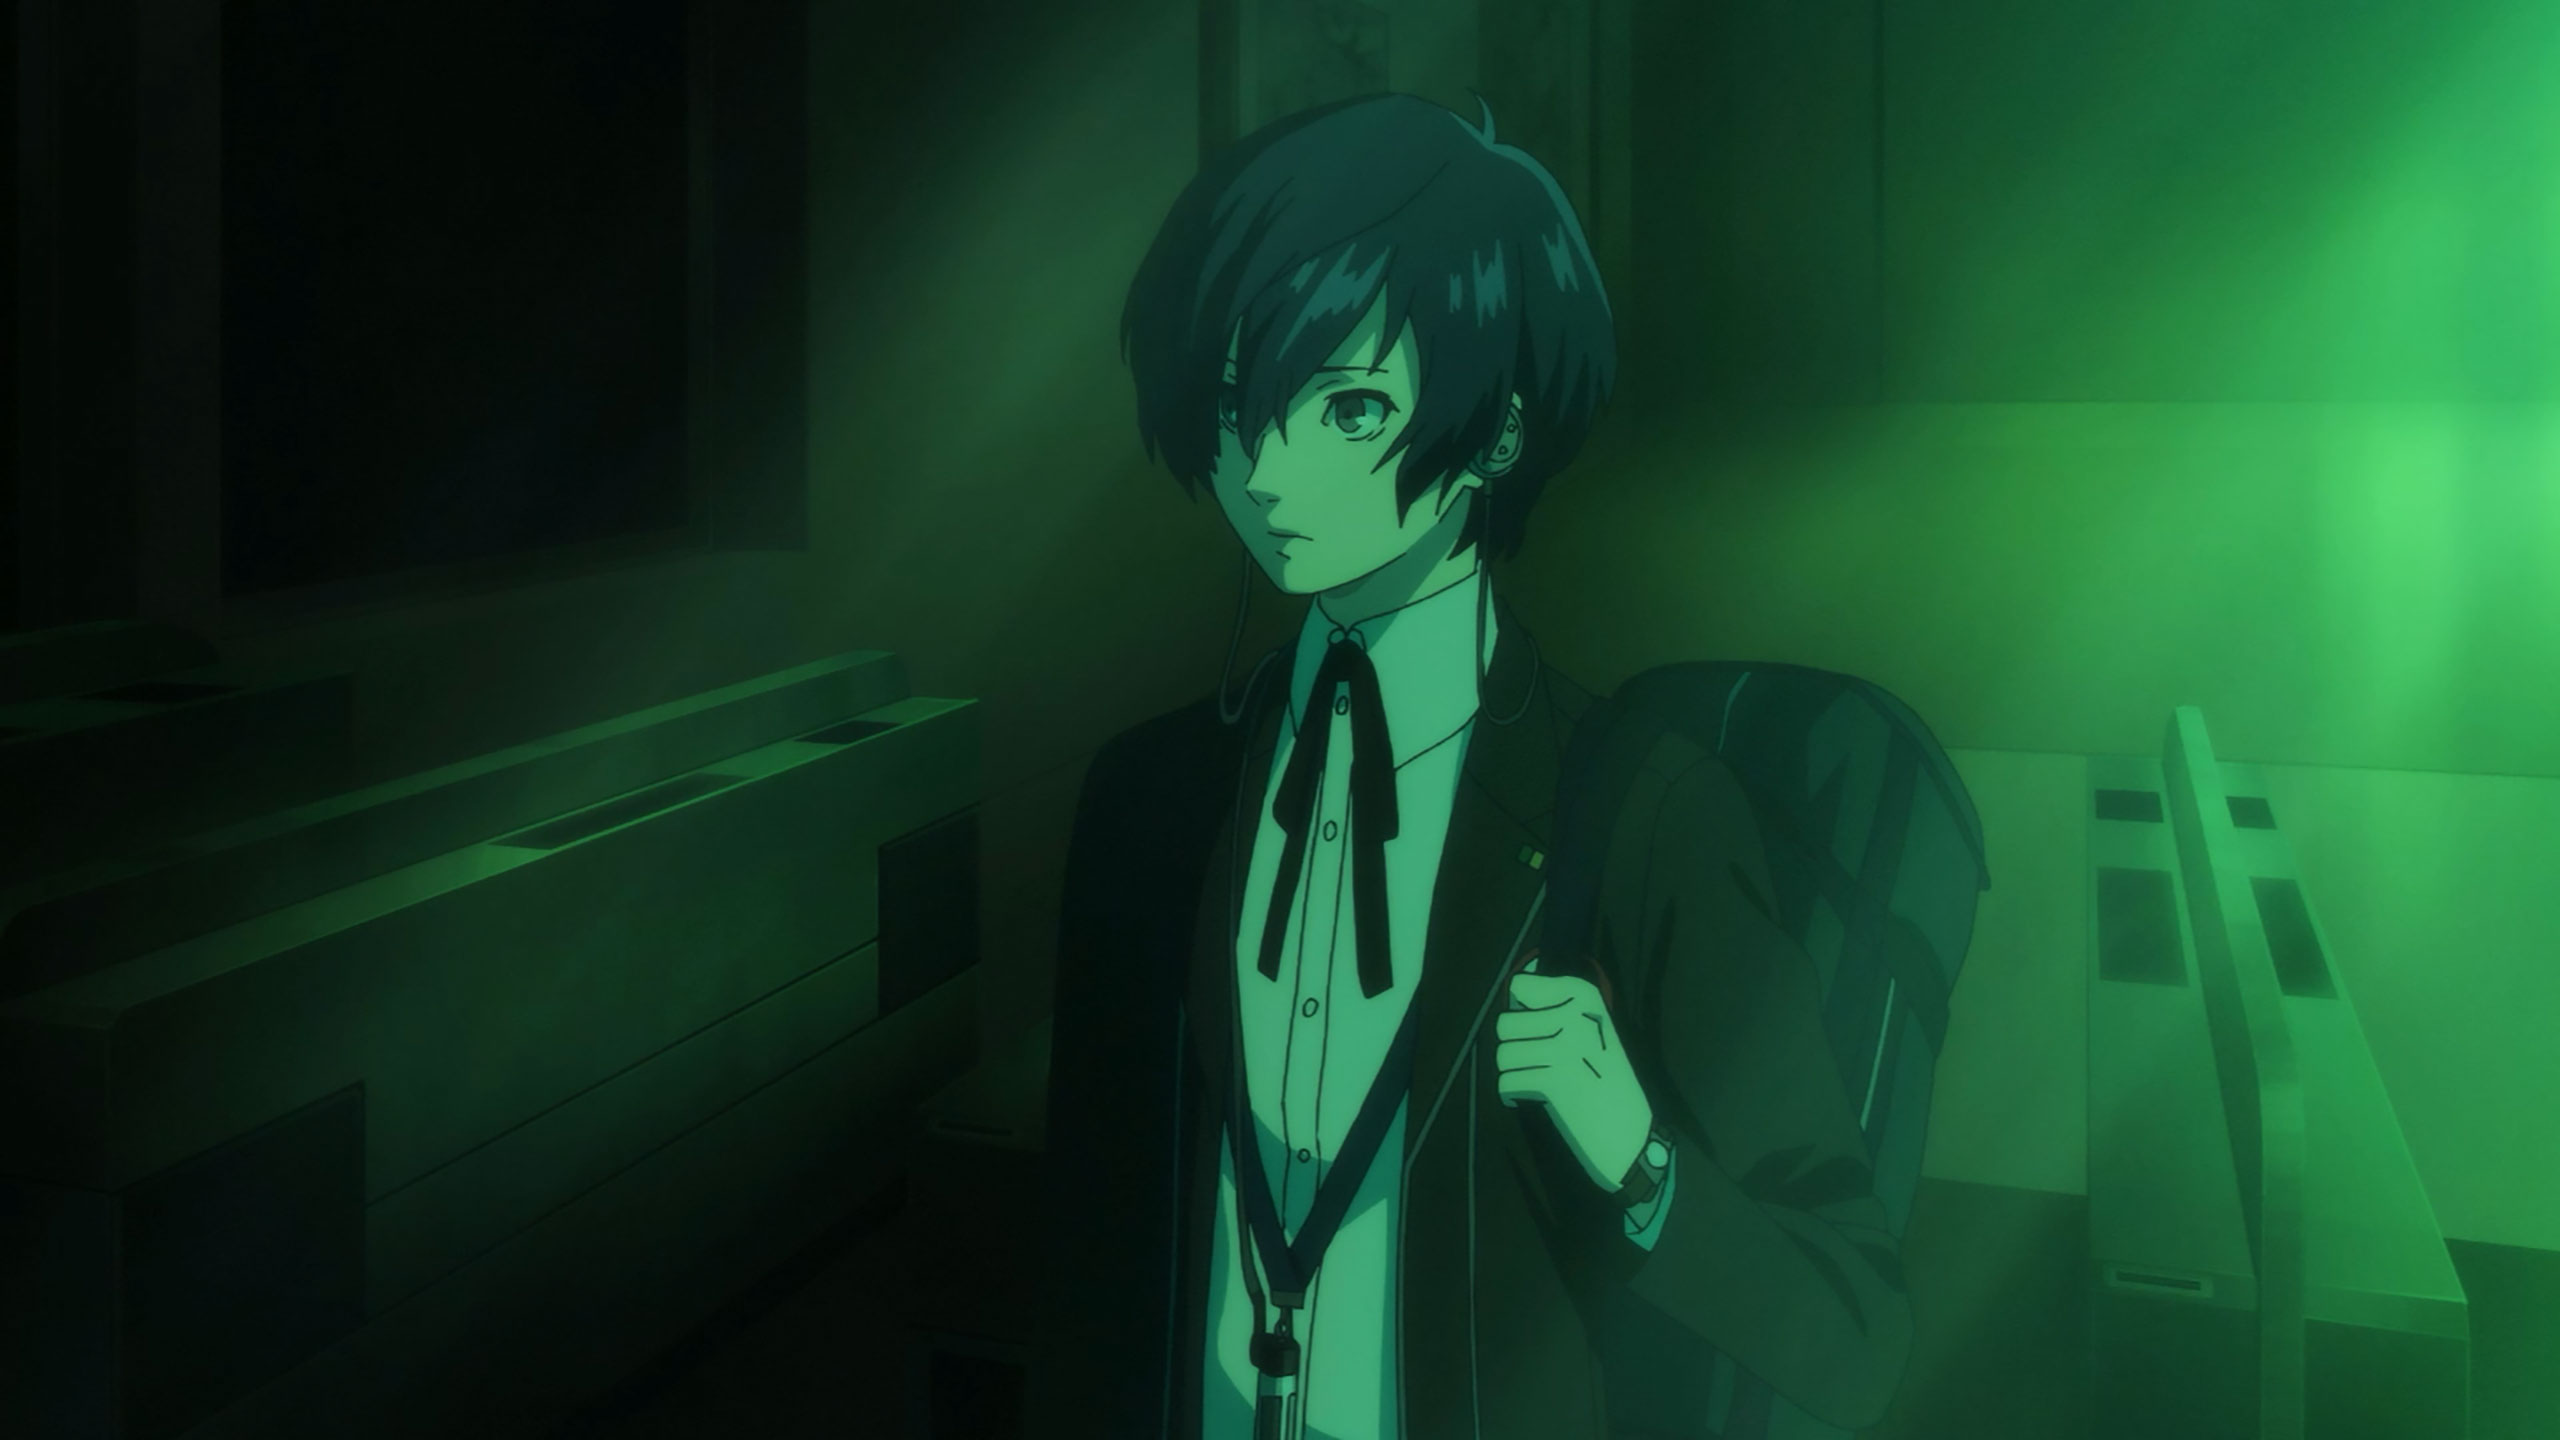 Persona 3 Reload - Official Website